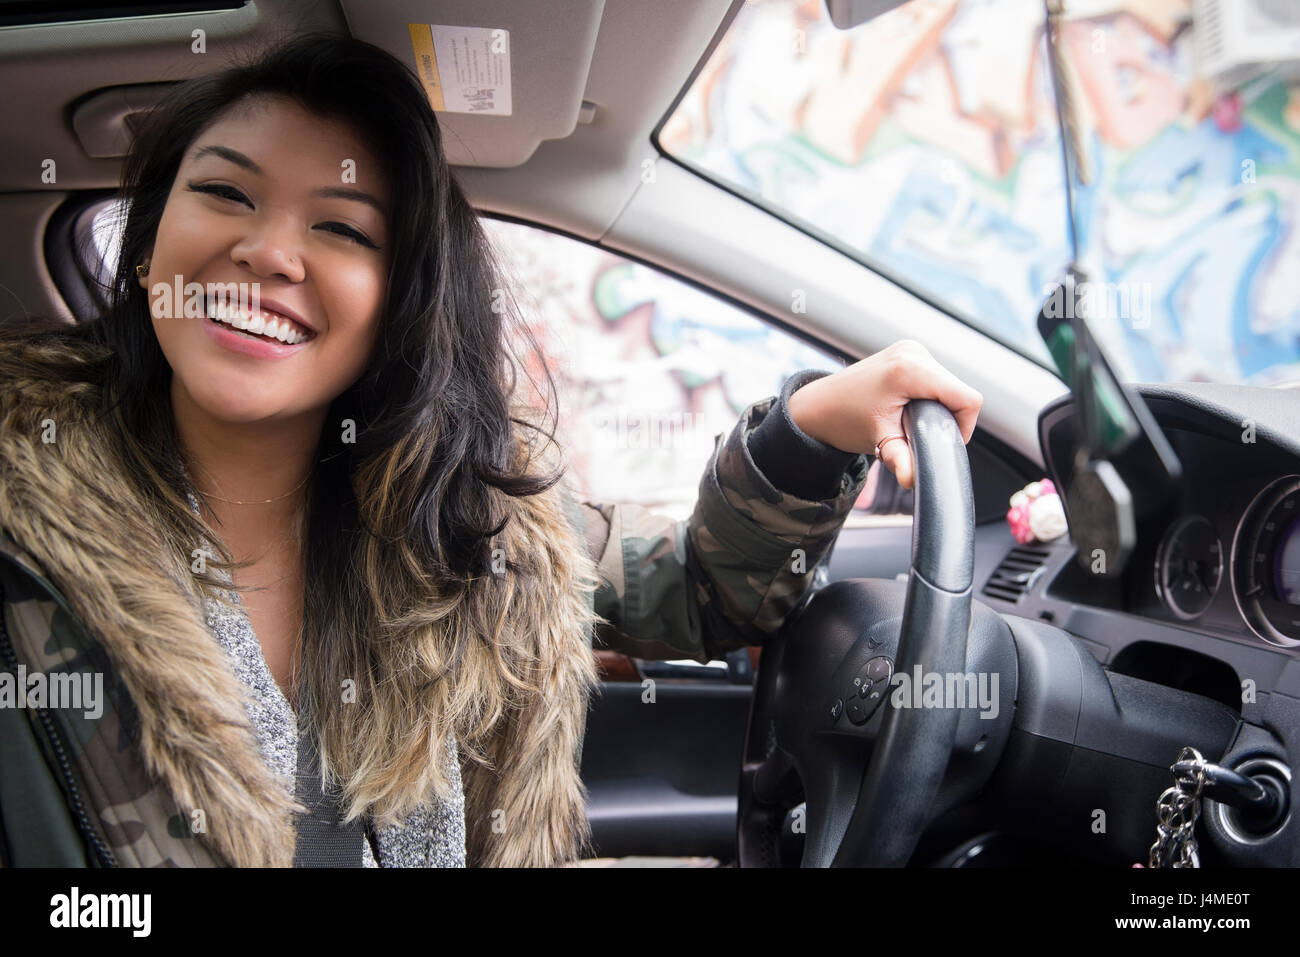 Portrait of smiling Mixed Race woman driving car Stock Photo